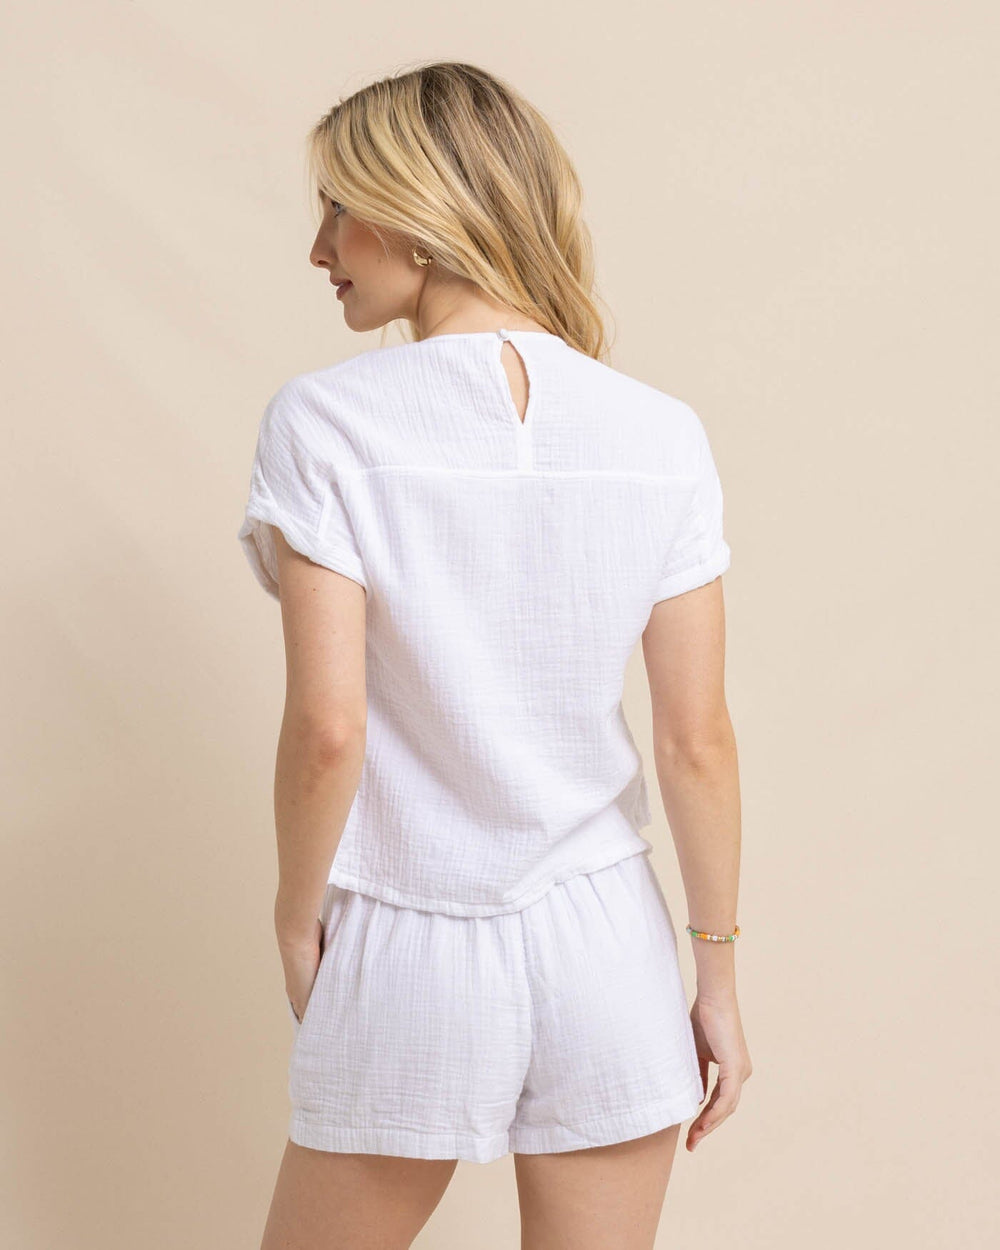 The back view of the Southern Tide Imogen Double Cloth Top by Southern Tide - Classic White